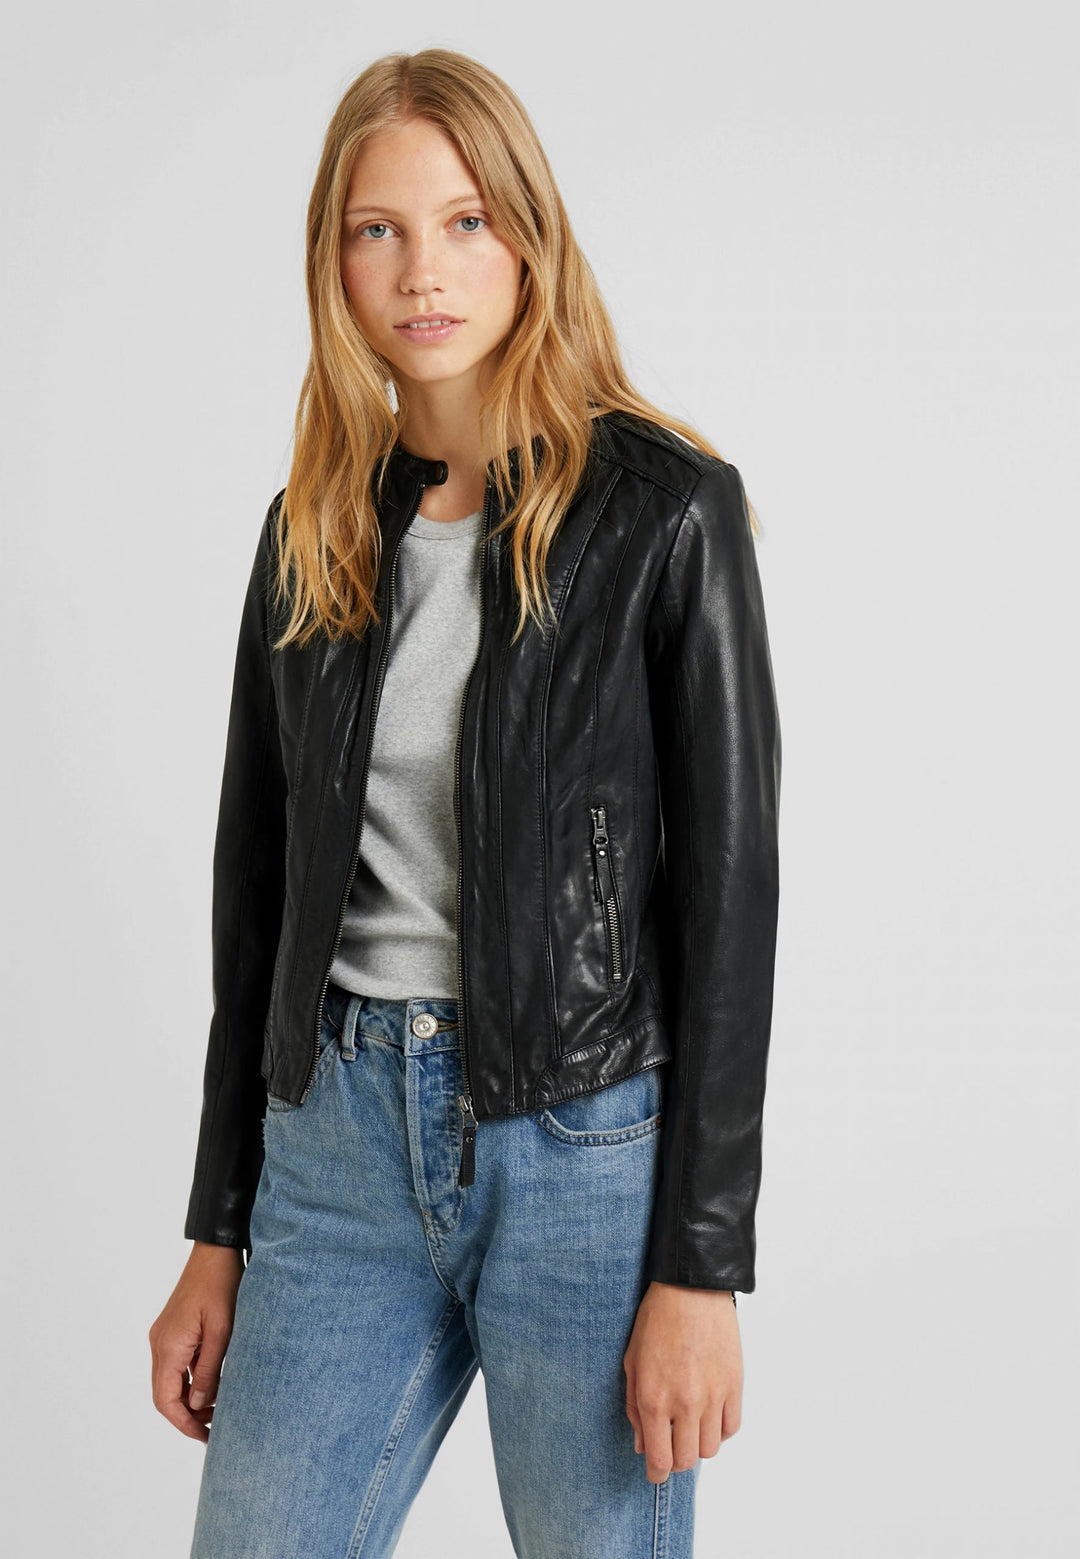 Classic Black Leather Jacket For Women